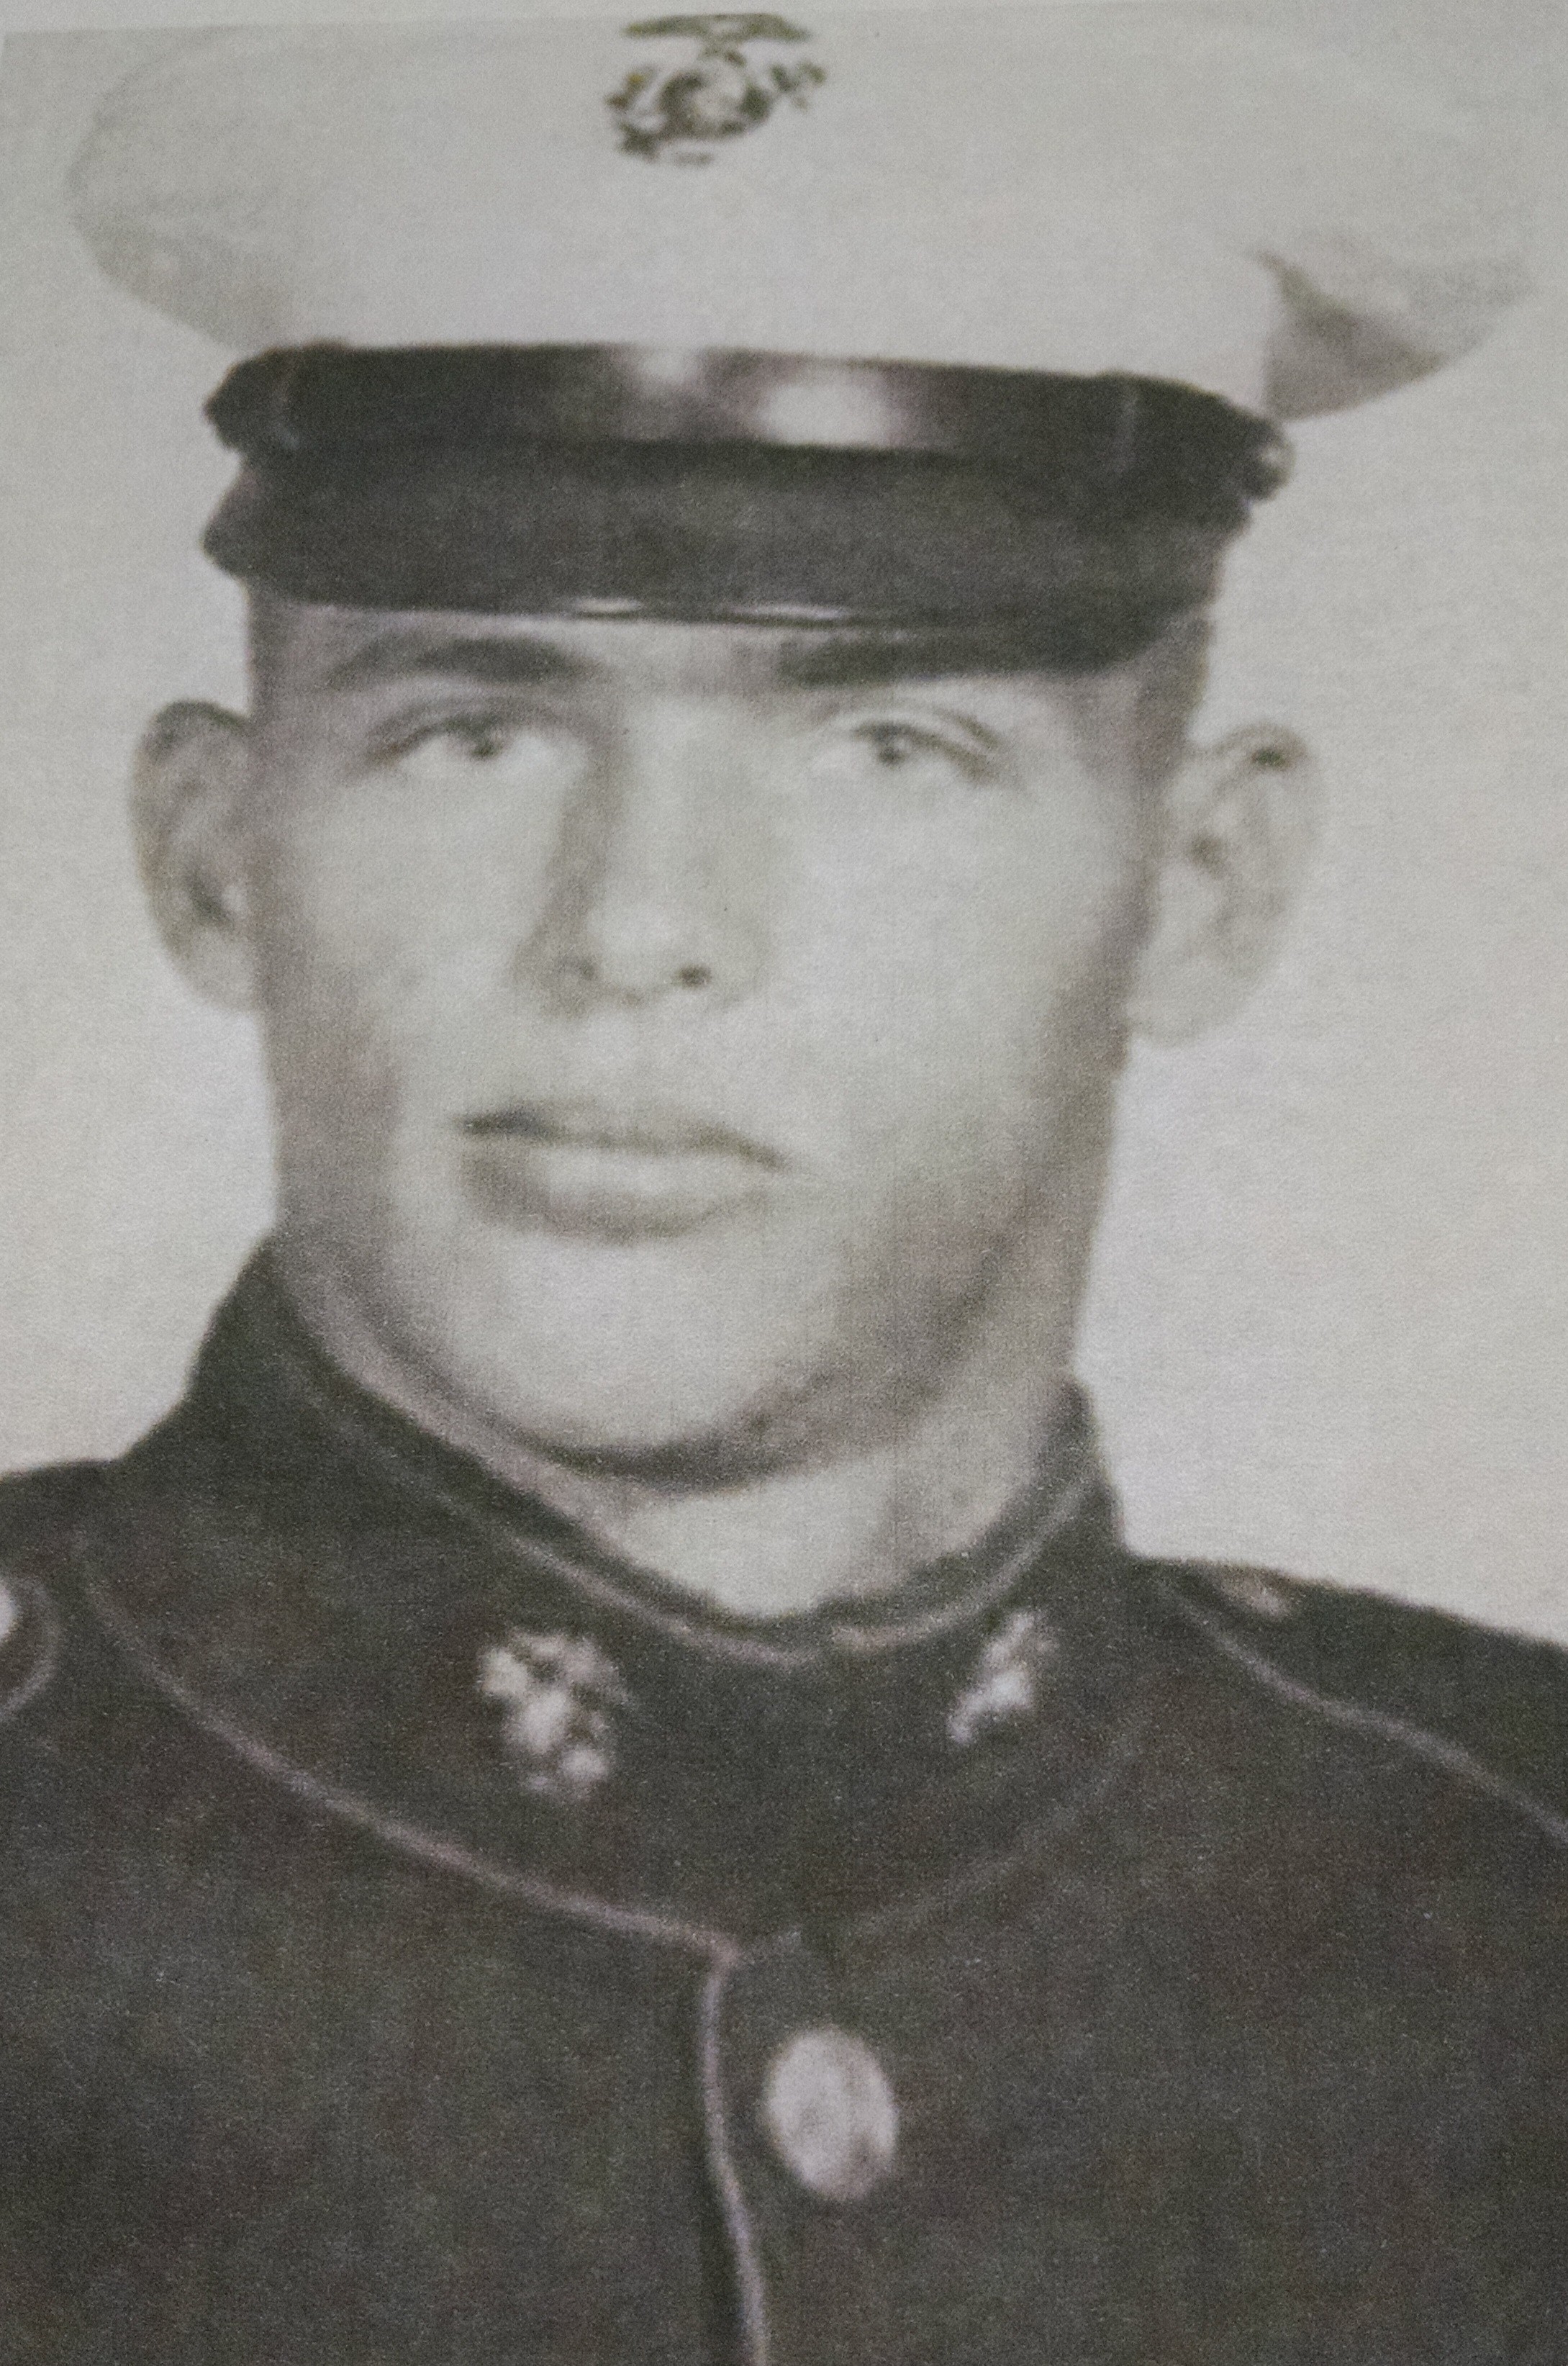 William L. Tanner gave his life for his country on March 15, 1969 in Quang, Vietnam.